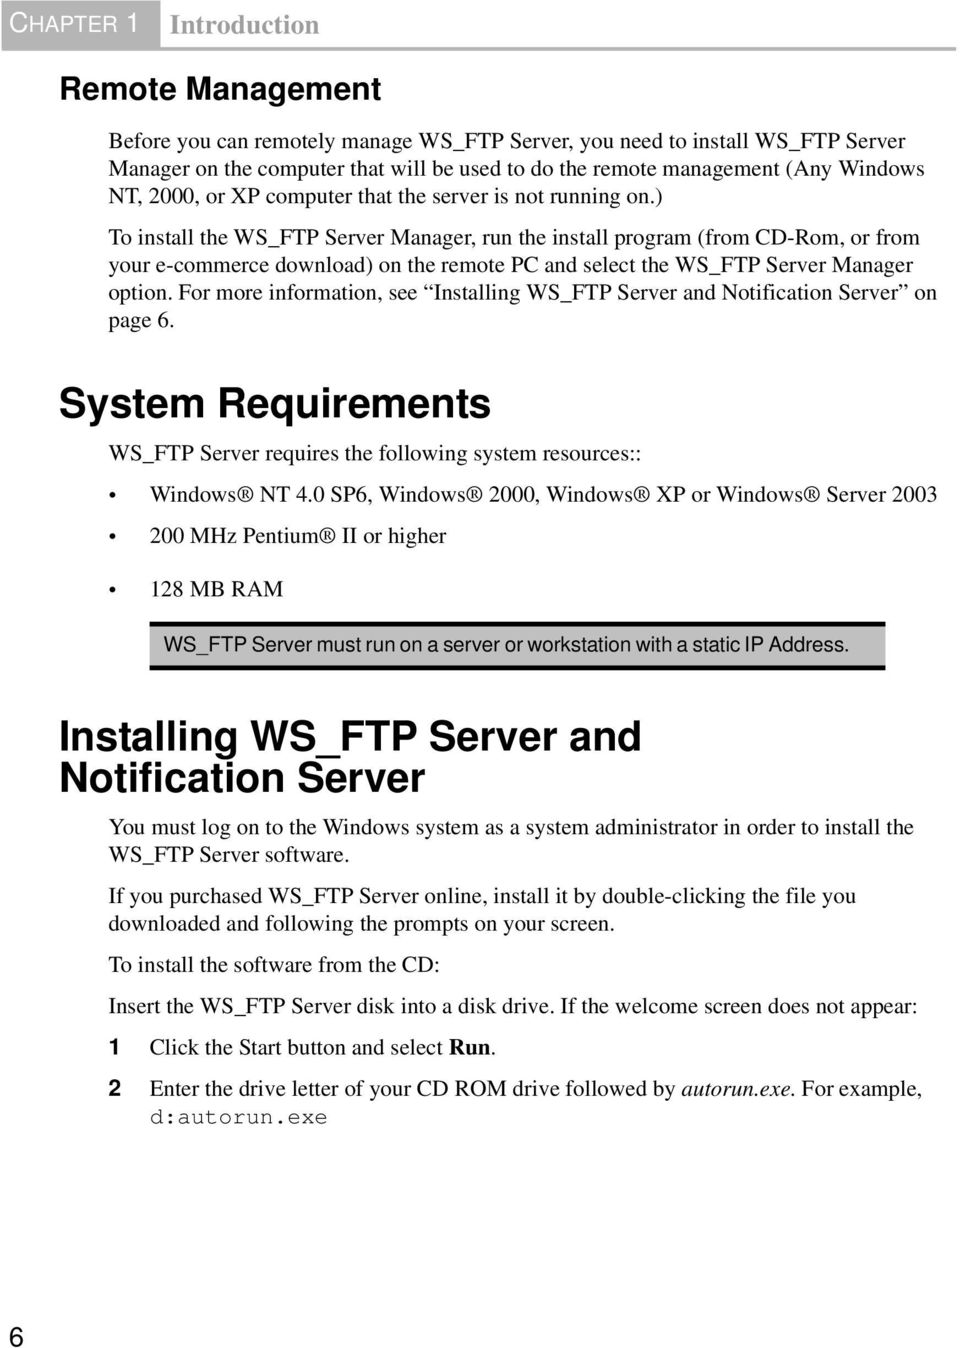 ) To install the WS_FTP Server Manager, run the install program (from CD-Rom, or from your e-commerce download) on the remote PC and select the WS_FTP Server Manager option.